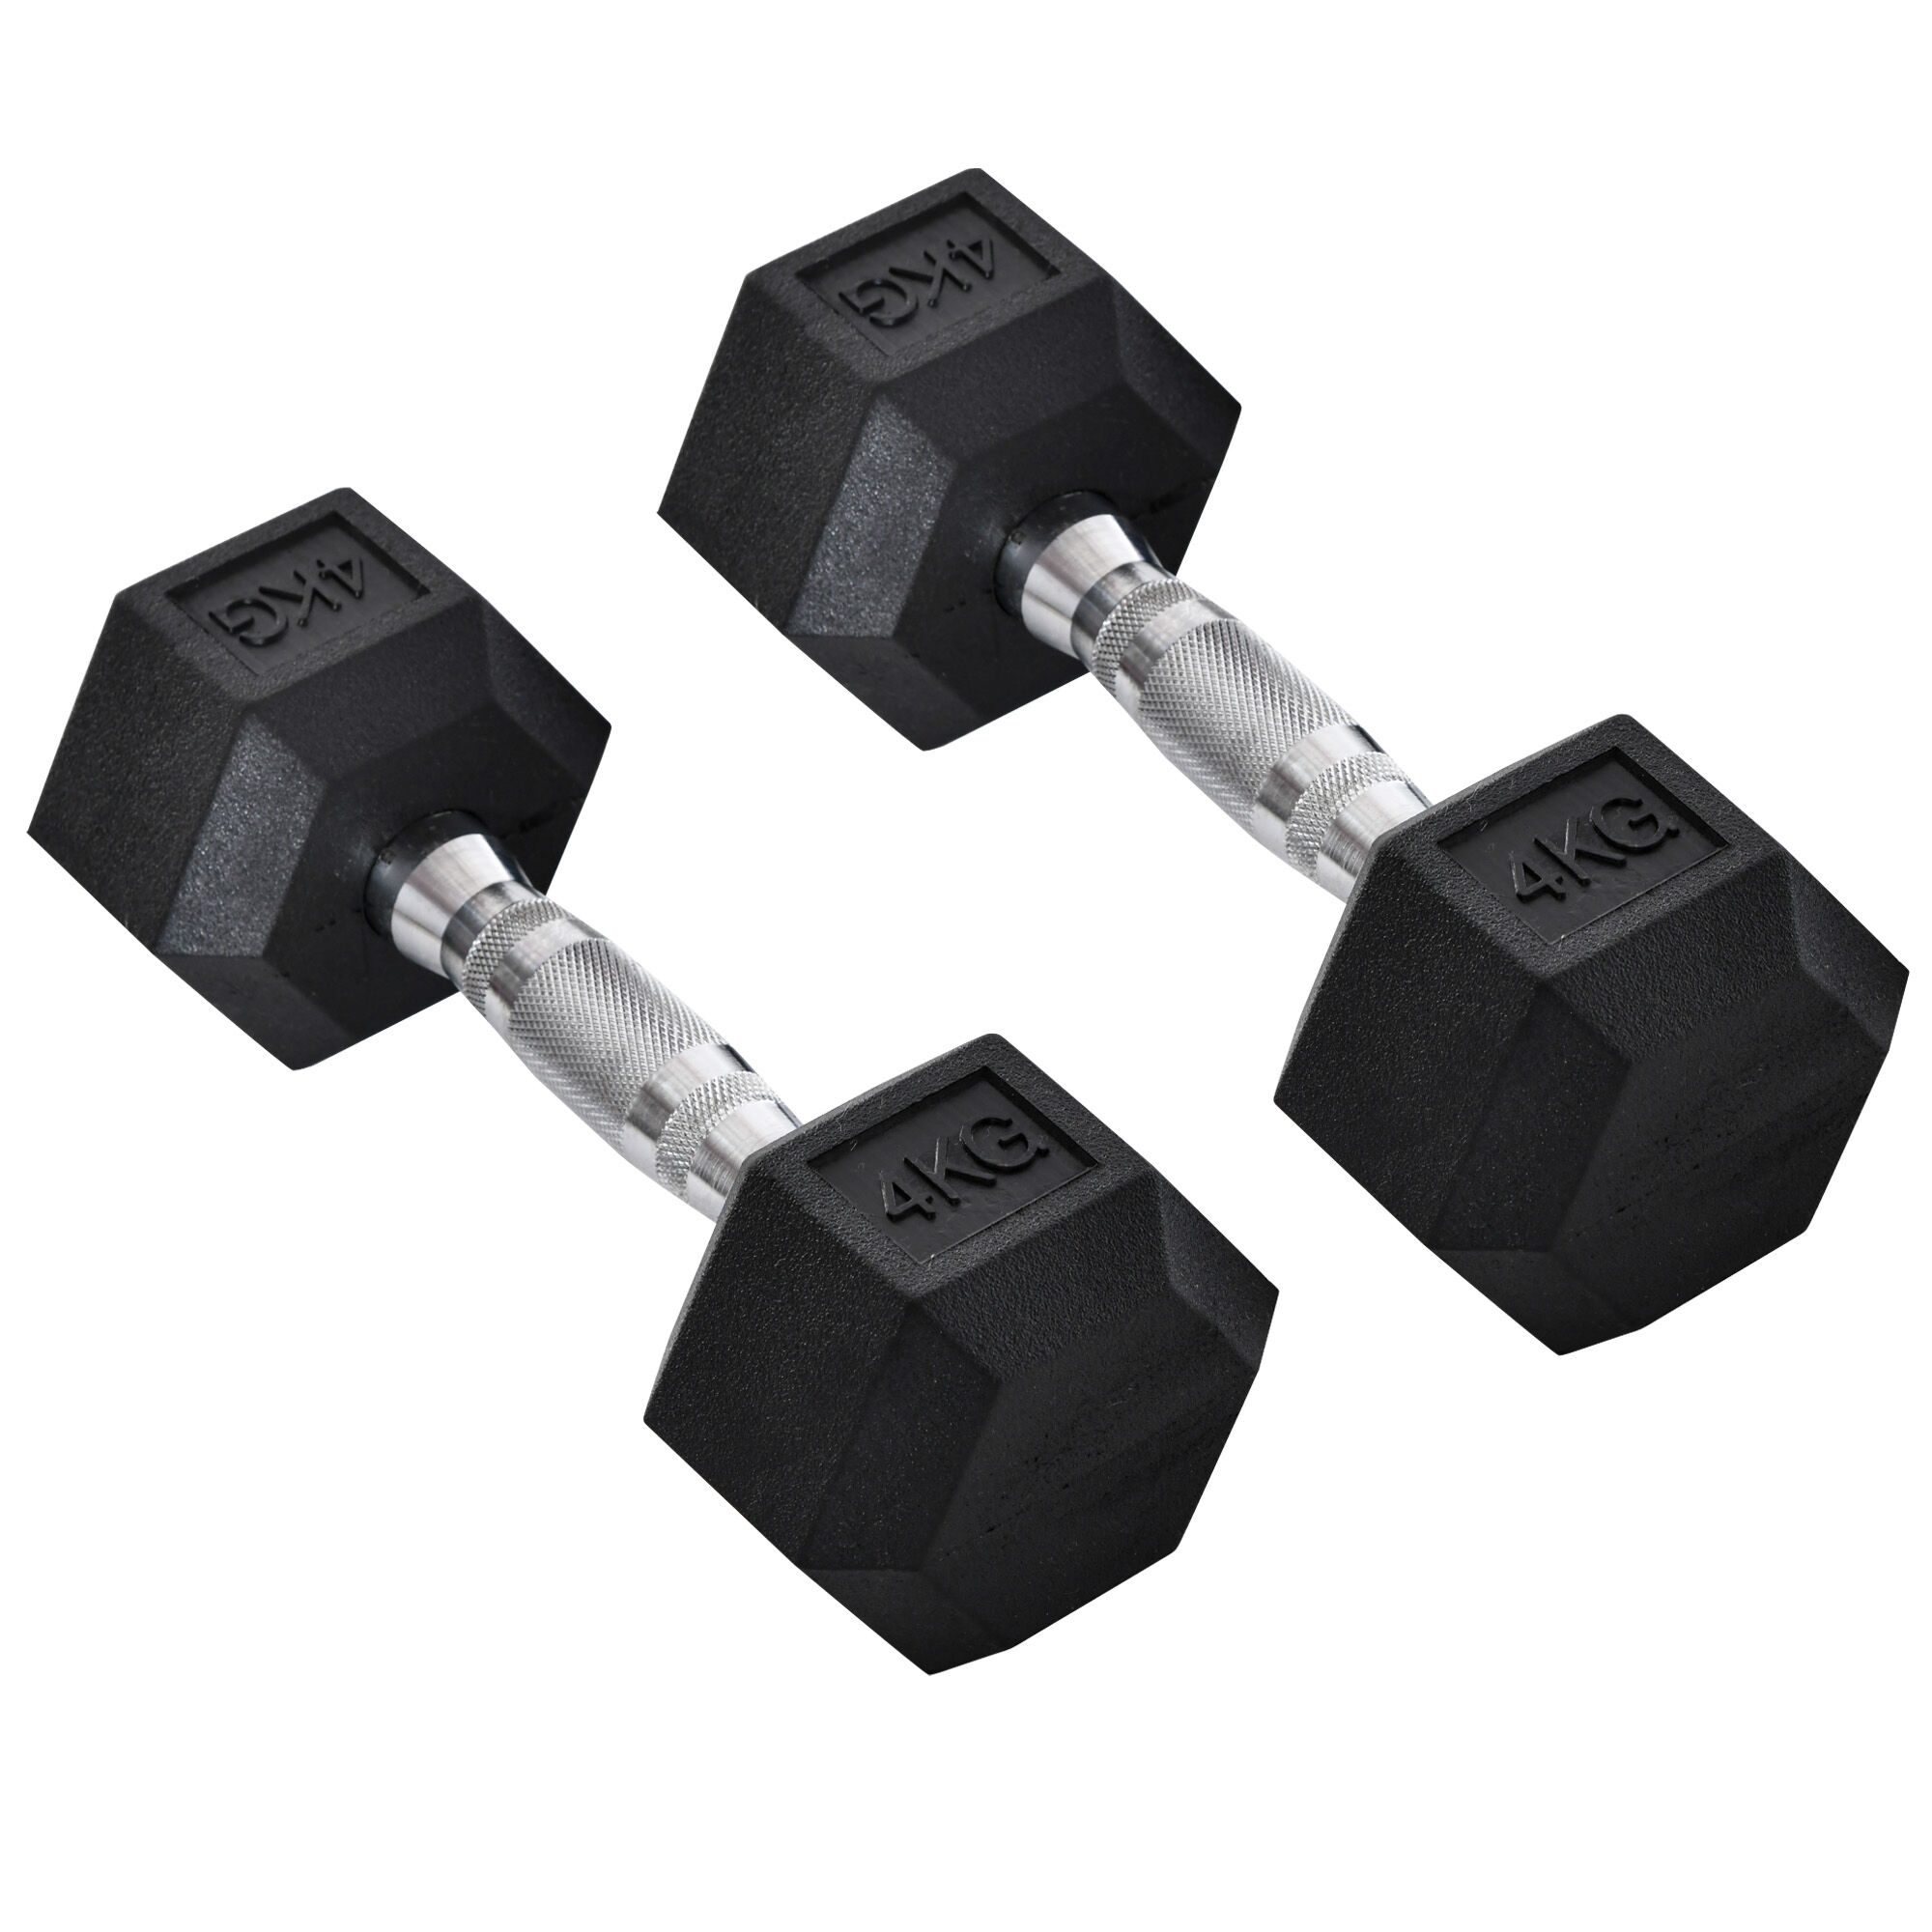 HOMCOM Hexagonal Rubber Dumbbell Set, 2x4kg Sports Weights for Home Gym Fitness, Weight Lifting Exercise